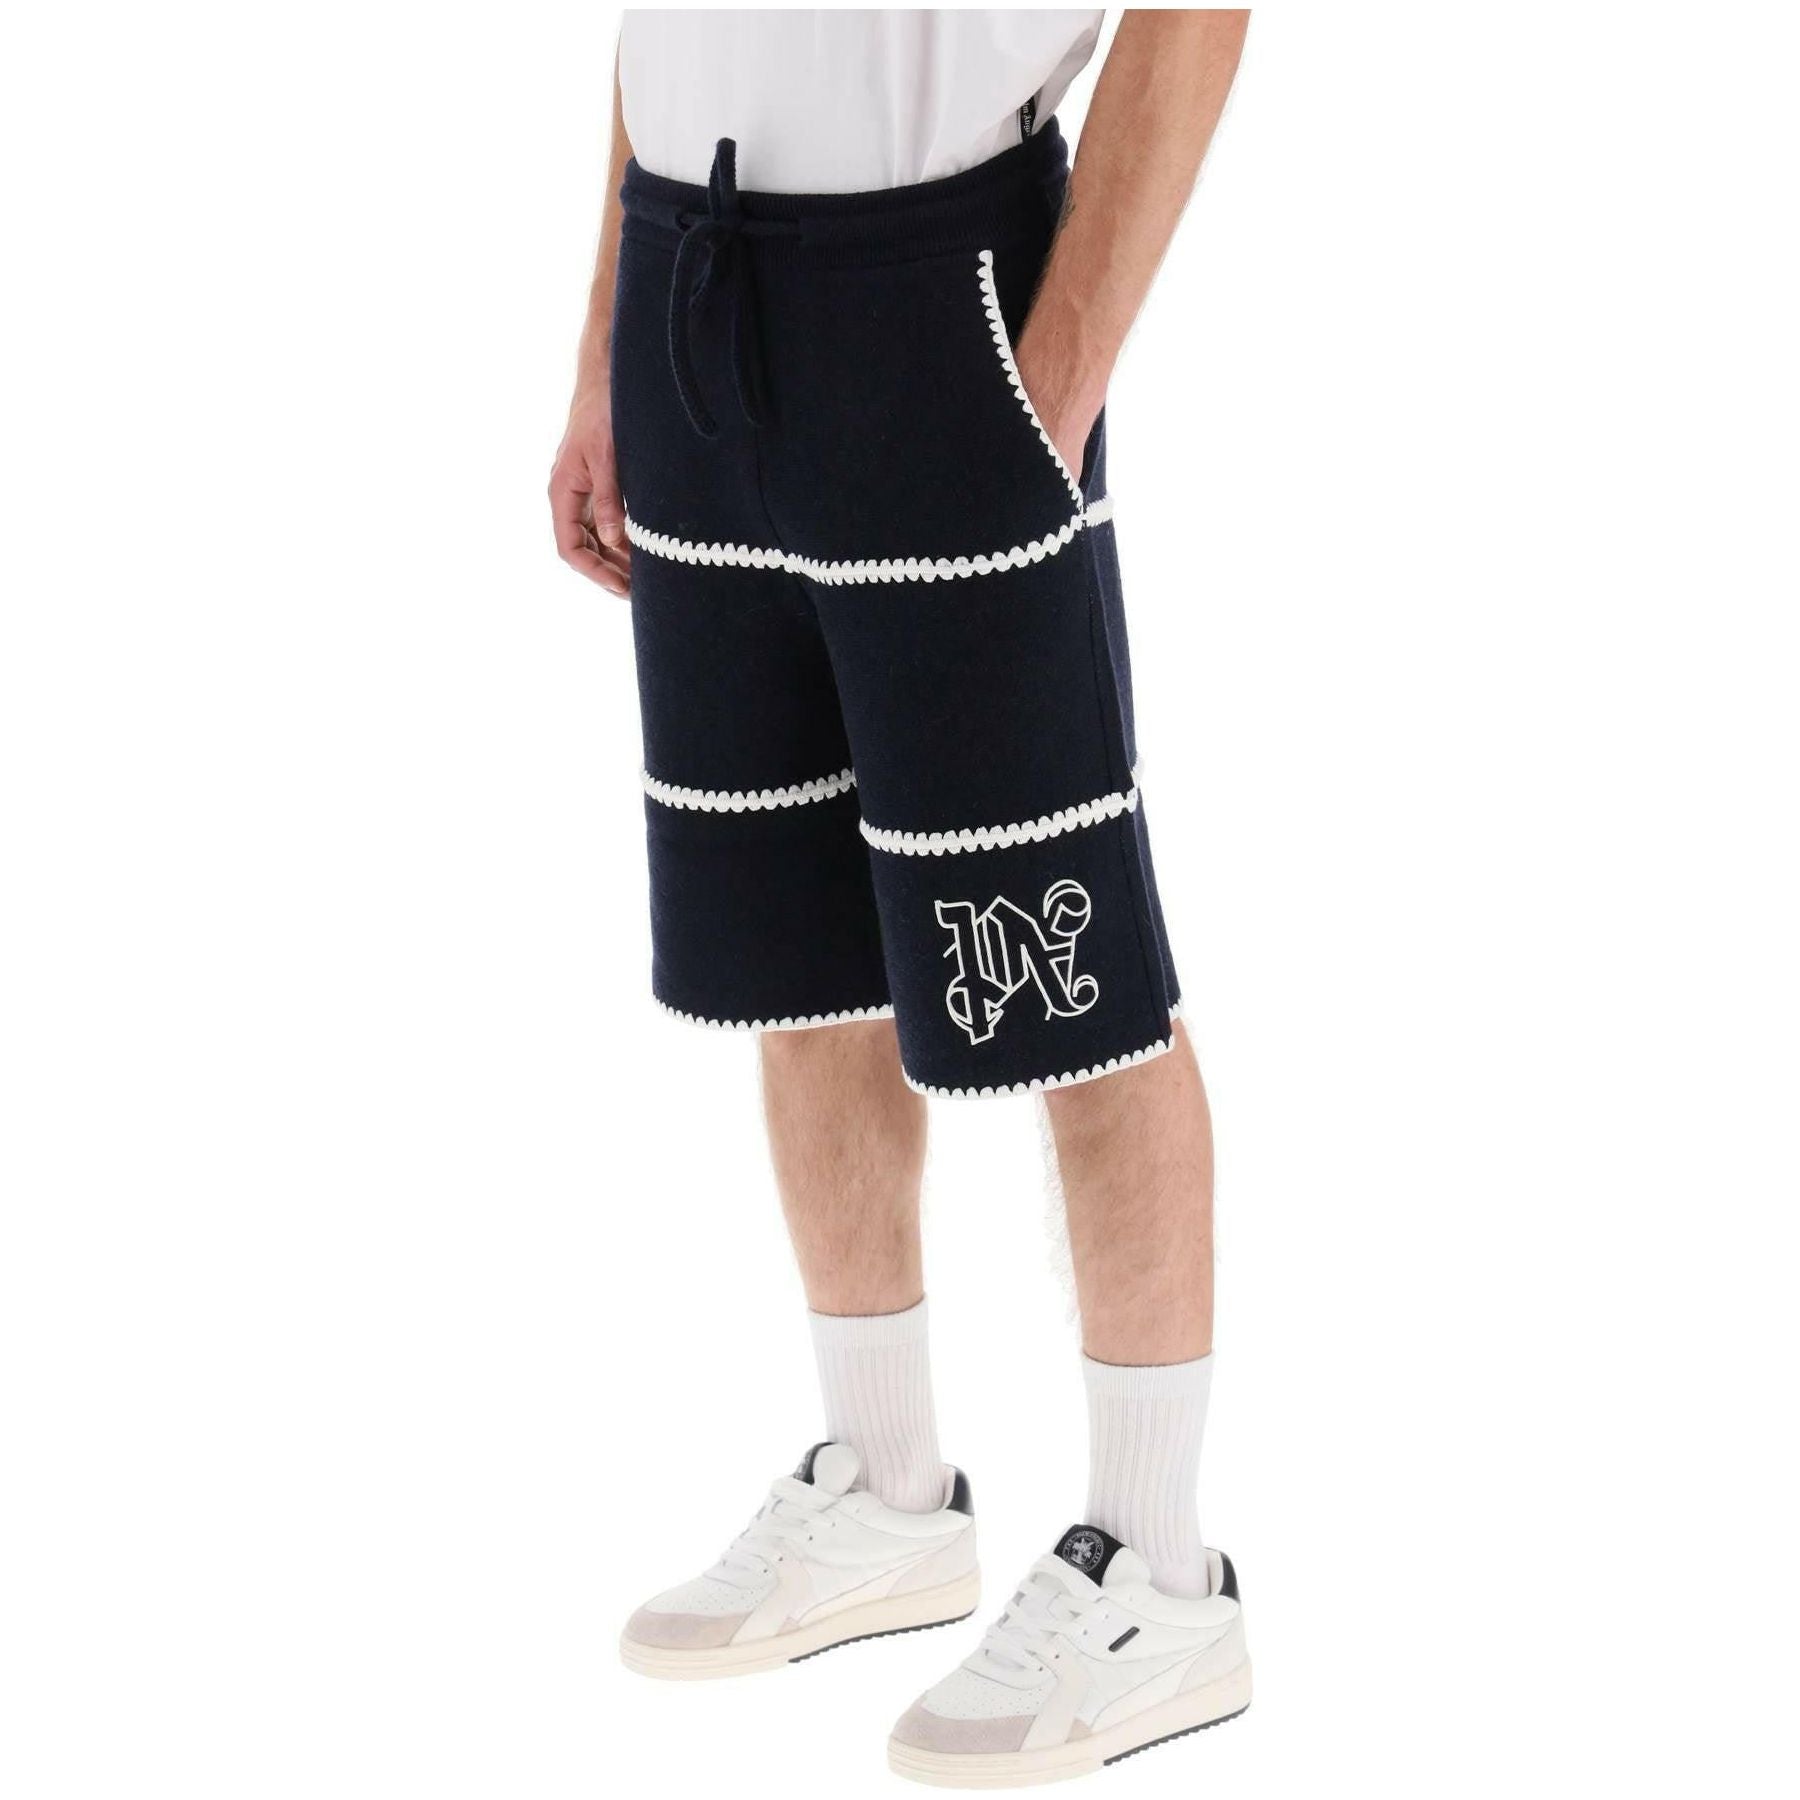 Wool Knit Shorts With Contrasting Trims PALM ANGELS JOHN JULIA.